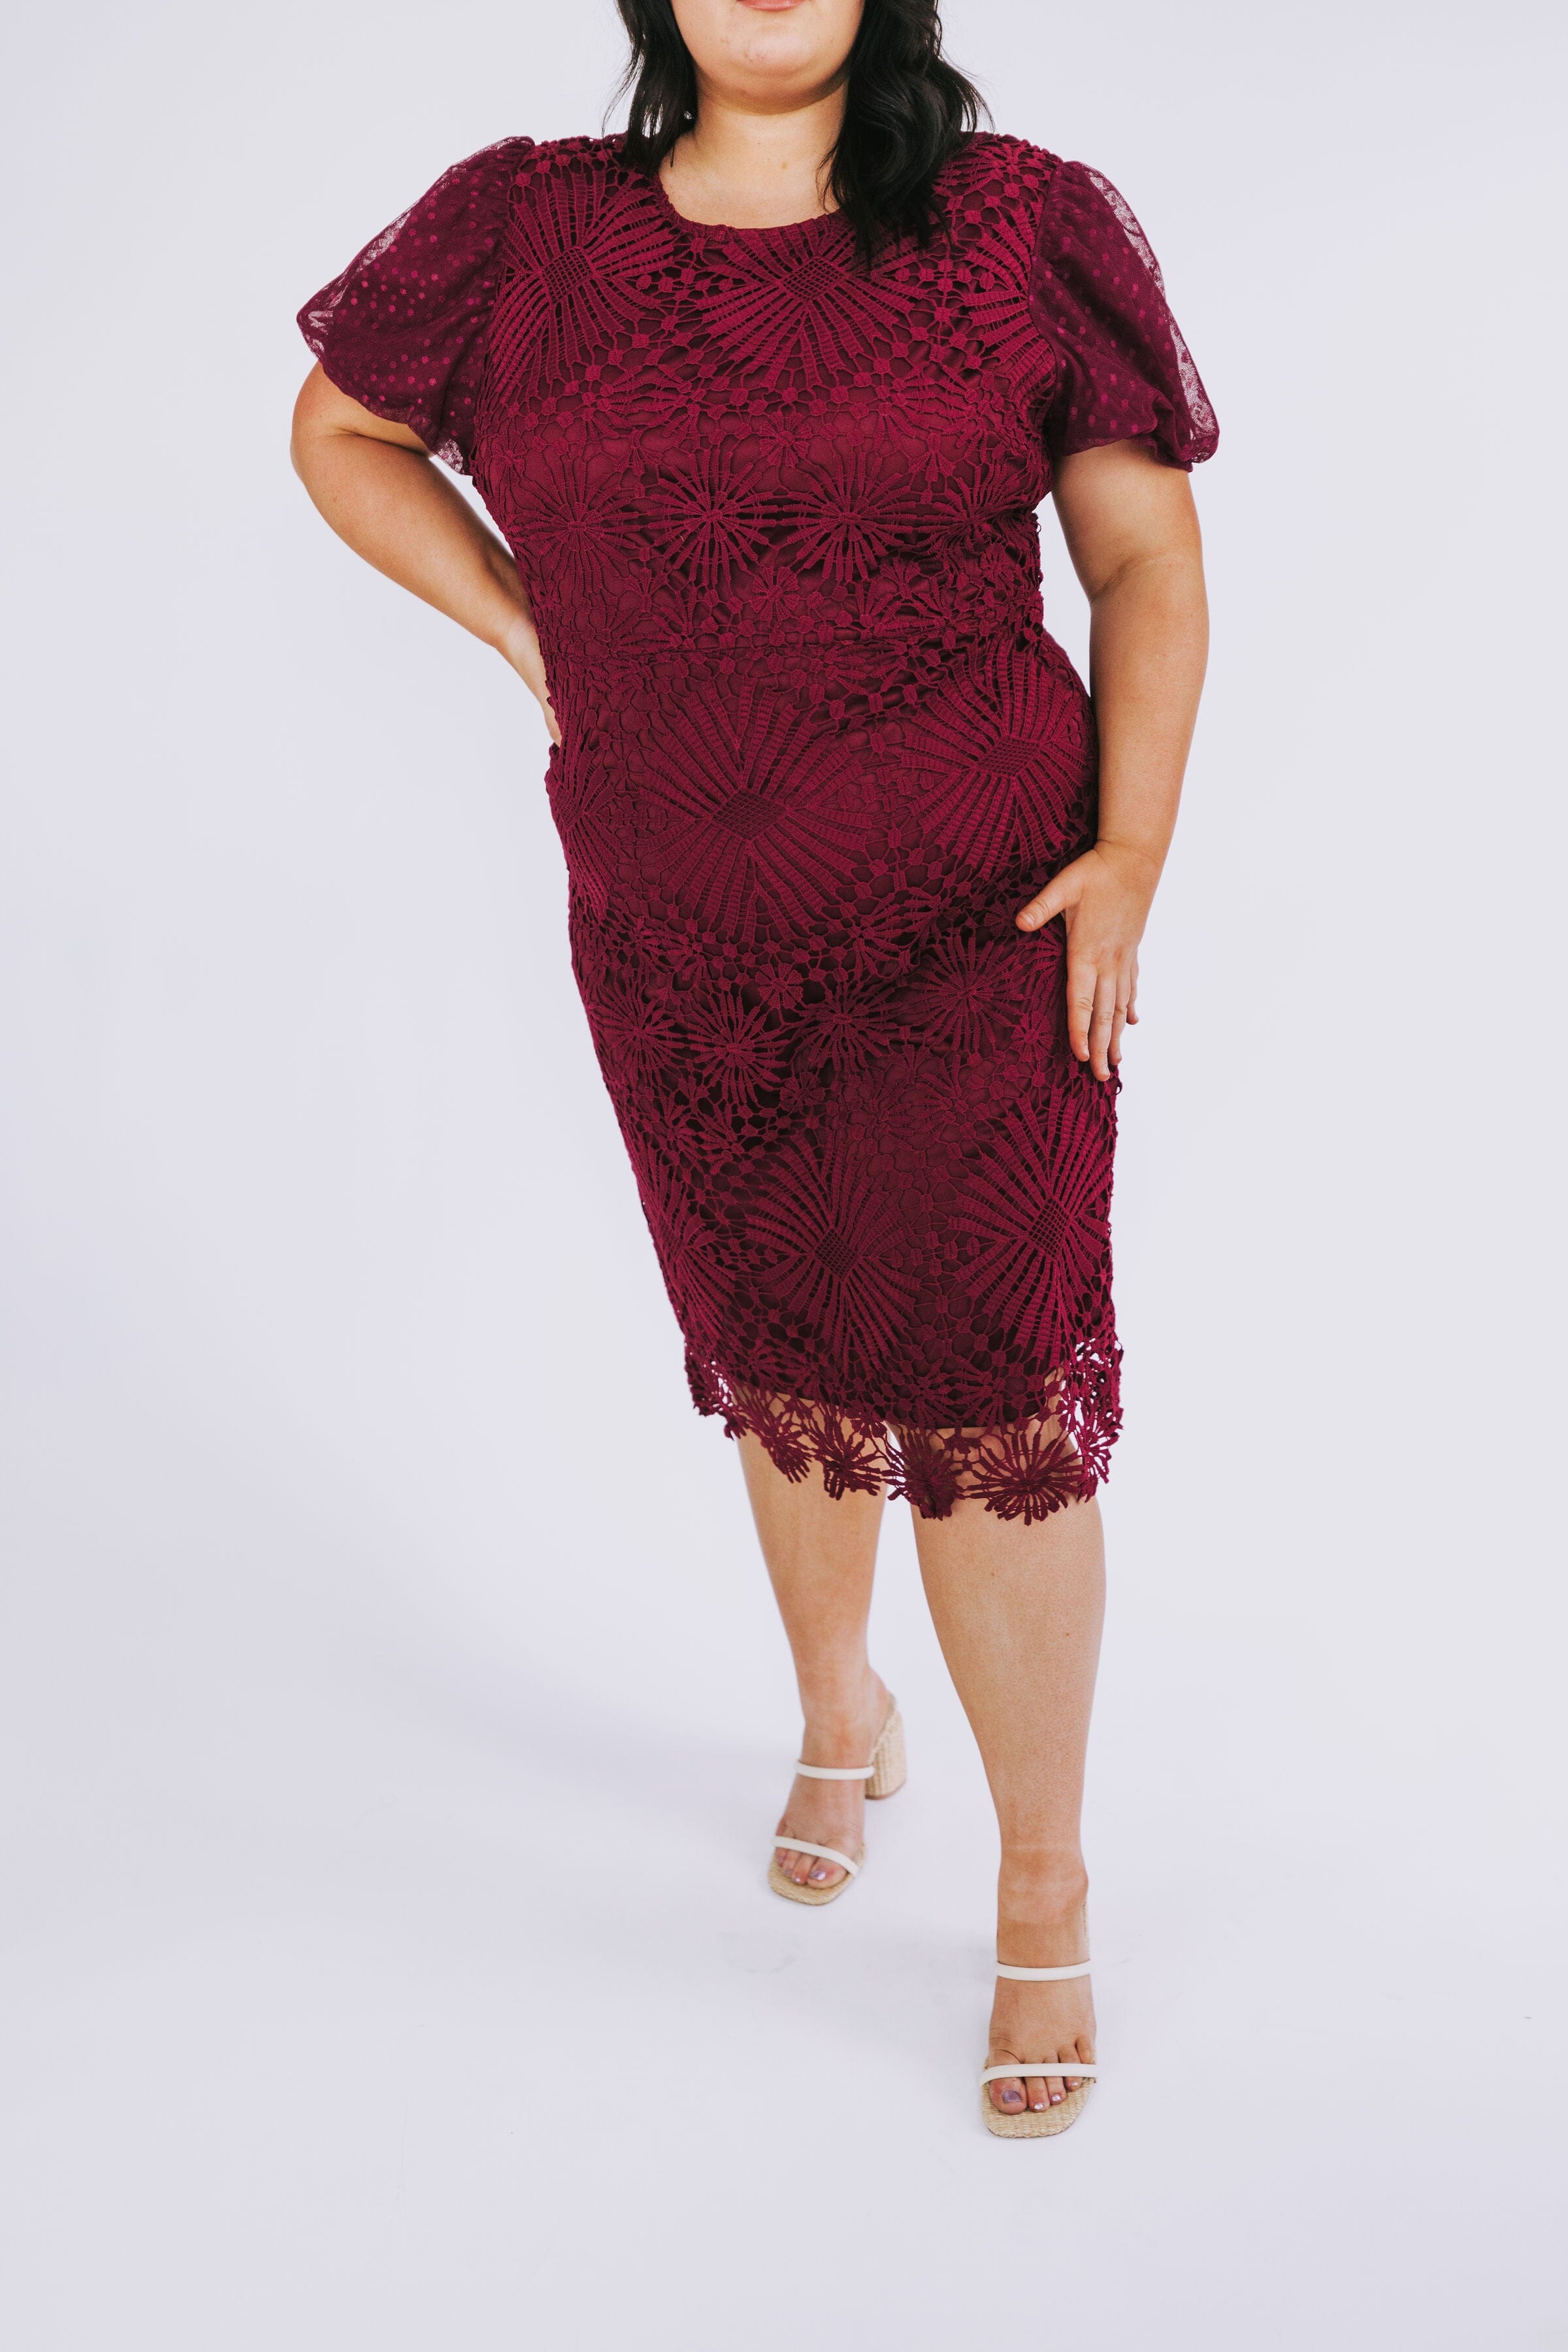 ONE LOVED BABE - Helena Dress - 2 Colors!